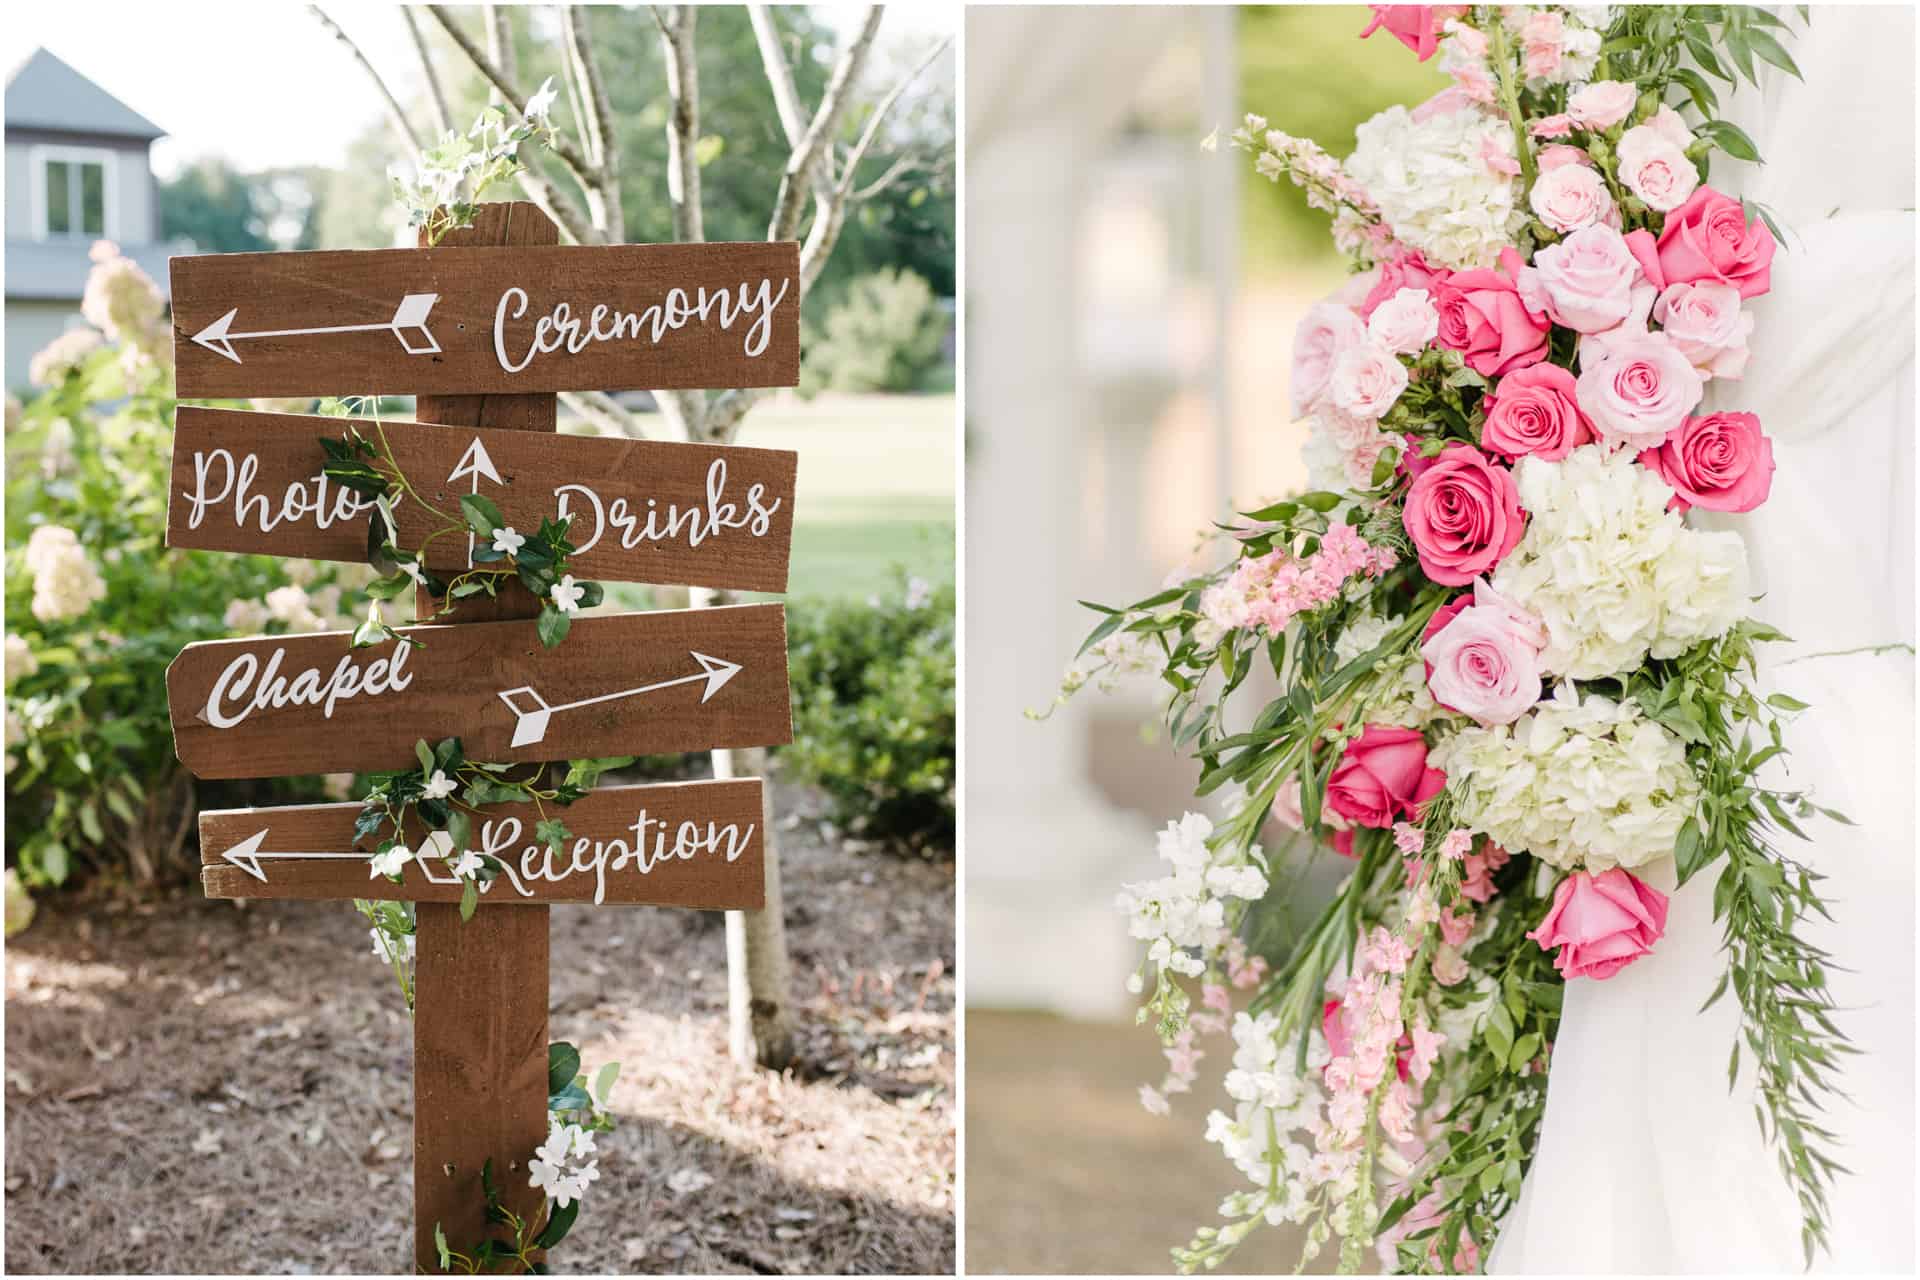 Wedding Details - Pink and White flower display